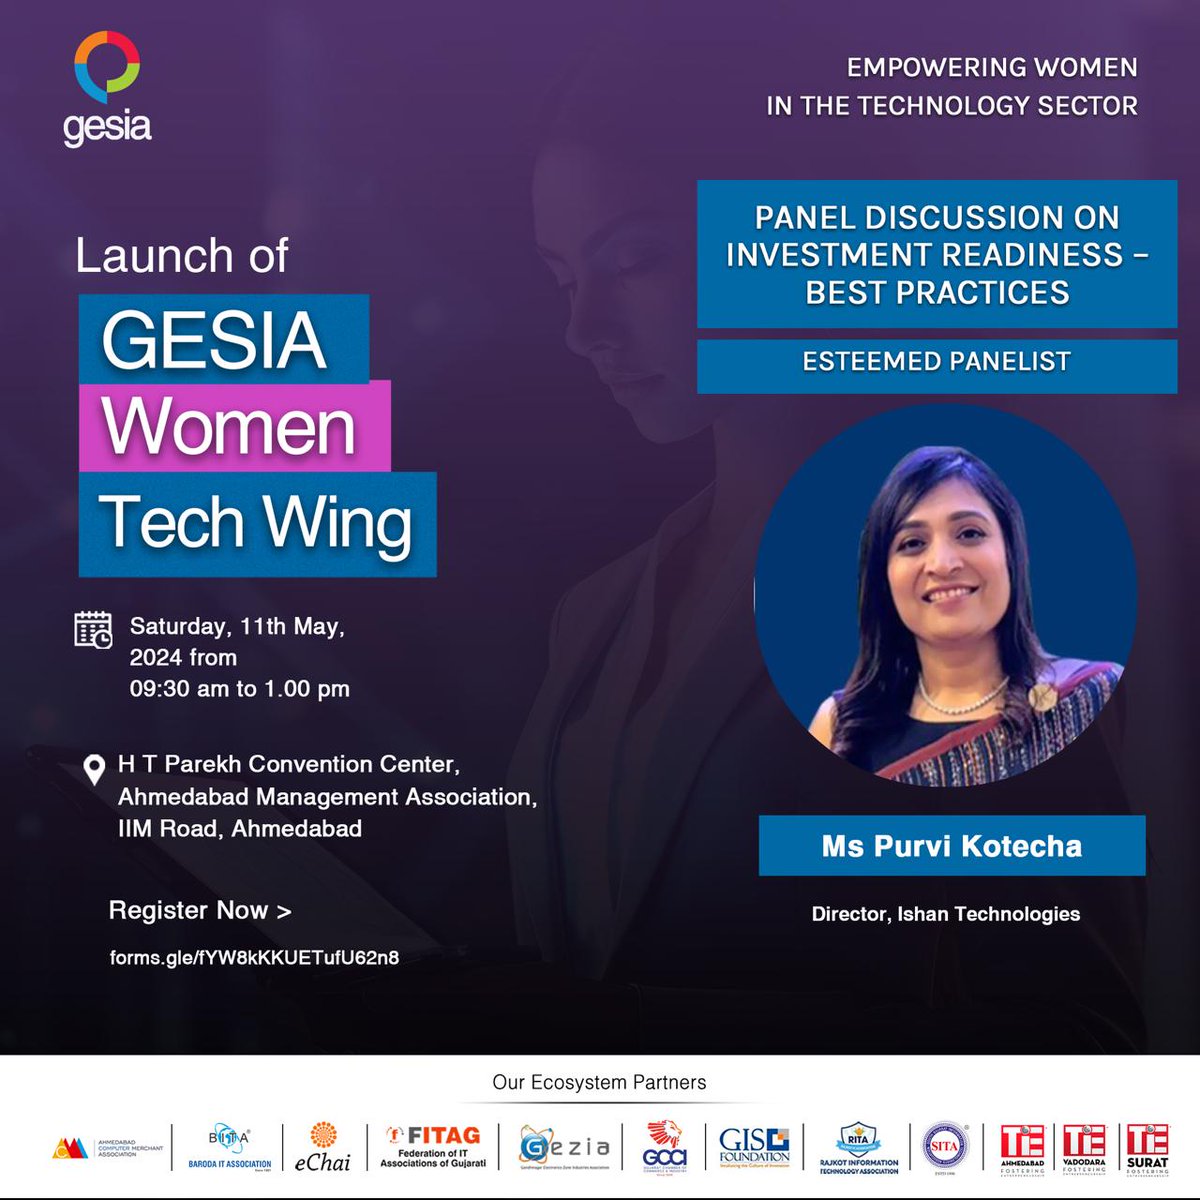 Join #Ishan Technologies' Director, Purvi Kotecha, an esteemed panelist addressing the topic Investment Readiness - Best Practice at the Launch of GESIA IT Association Women Tech Wing!

#ishanism #ishantechnologies #GESIAWomenTechWing #Innovation #DiversityInTech